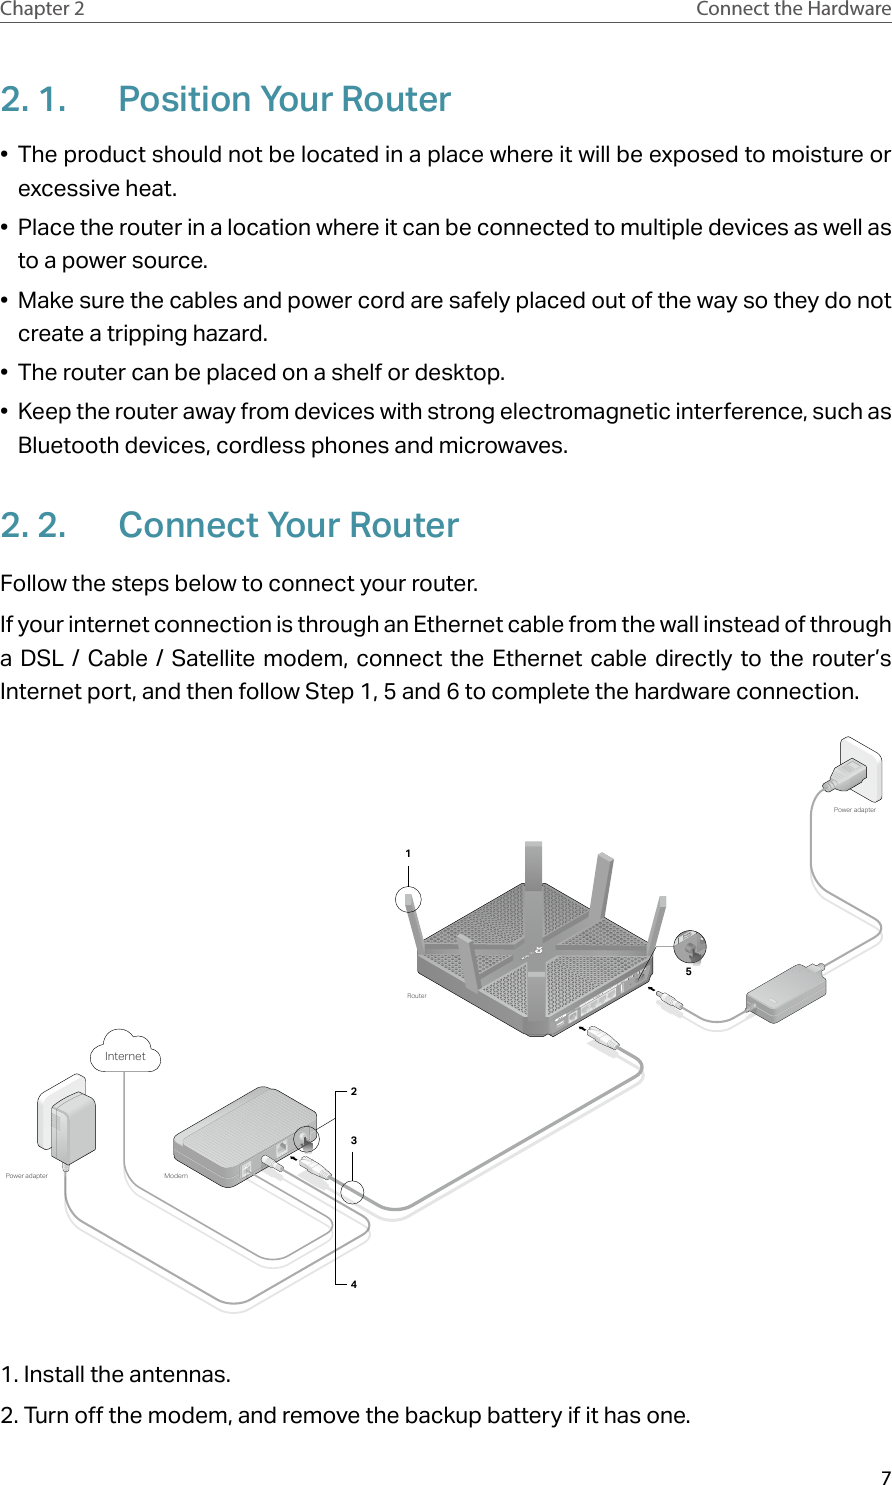 7Chapter 2 Connect the Hardware2. 1.  Position Your Router•  The product should not be located in a place where it will be exposed to moisture or excessive heat.•  Place the router in a location where it can be connected to multiple devices as well as to a power source.•  Make sure the cables and power cord are safely placed out of the way so they do not create a tripping hazard.•  The router can be placed on a shelf or desktop.•  Keep the router away from devices with strong electromagnetic interference, such as Bluetooth devices, cordless phones and microwaves.2. 2.  Connect Your RouterFollow the steps below to connect your router.If your internet connection is through an Ethernet cable from the wall instead of through a DSL / Cable / Satellite modem, connect the Ethernet cable directly to the router’s Internet port, and then follow Step 1, 5 and 6 to complete the hardware connection.ModemPower adapterRouterPower adapter5Internet24311. Install the antennas.2. Turn off the modem, and remove the backup battery if it has one.